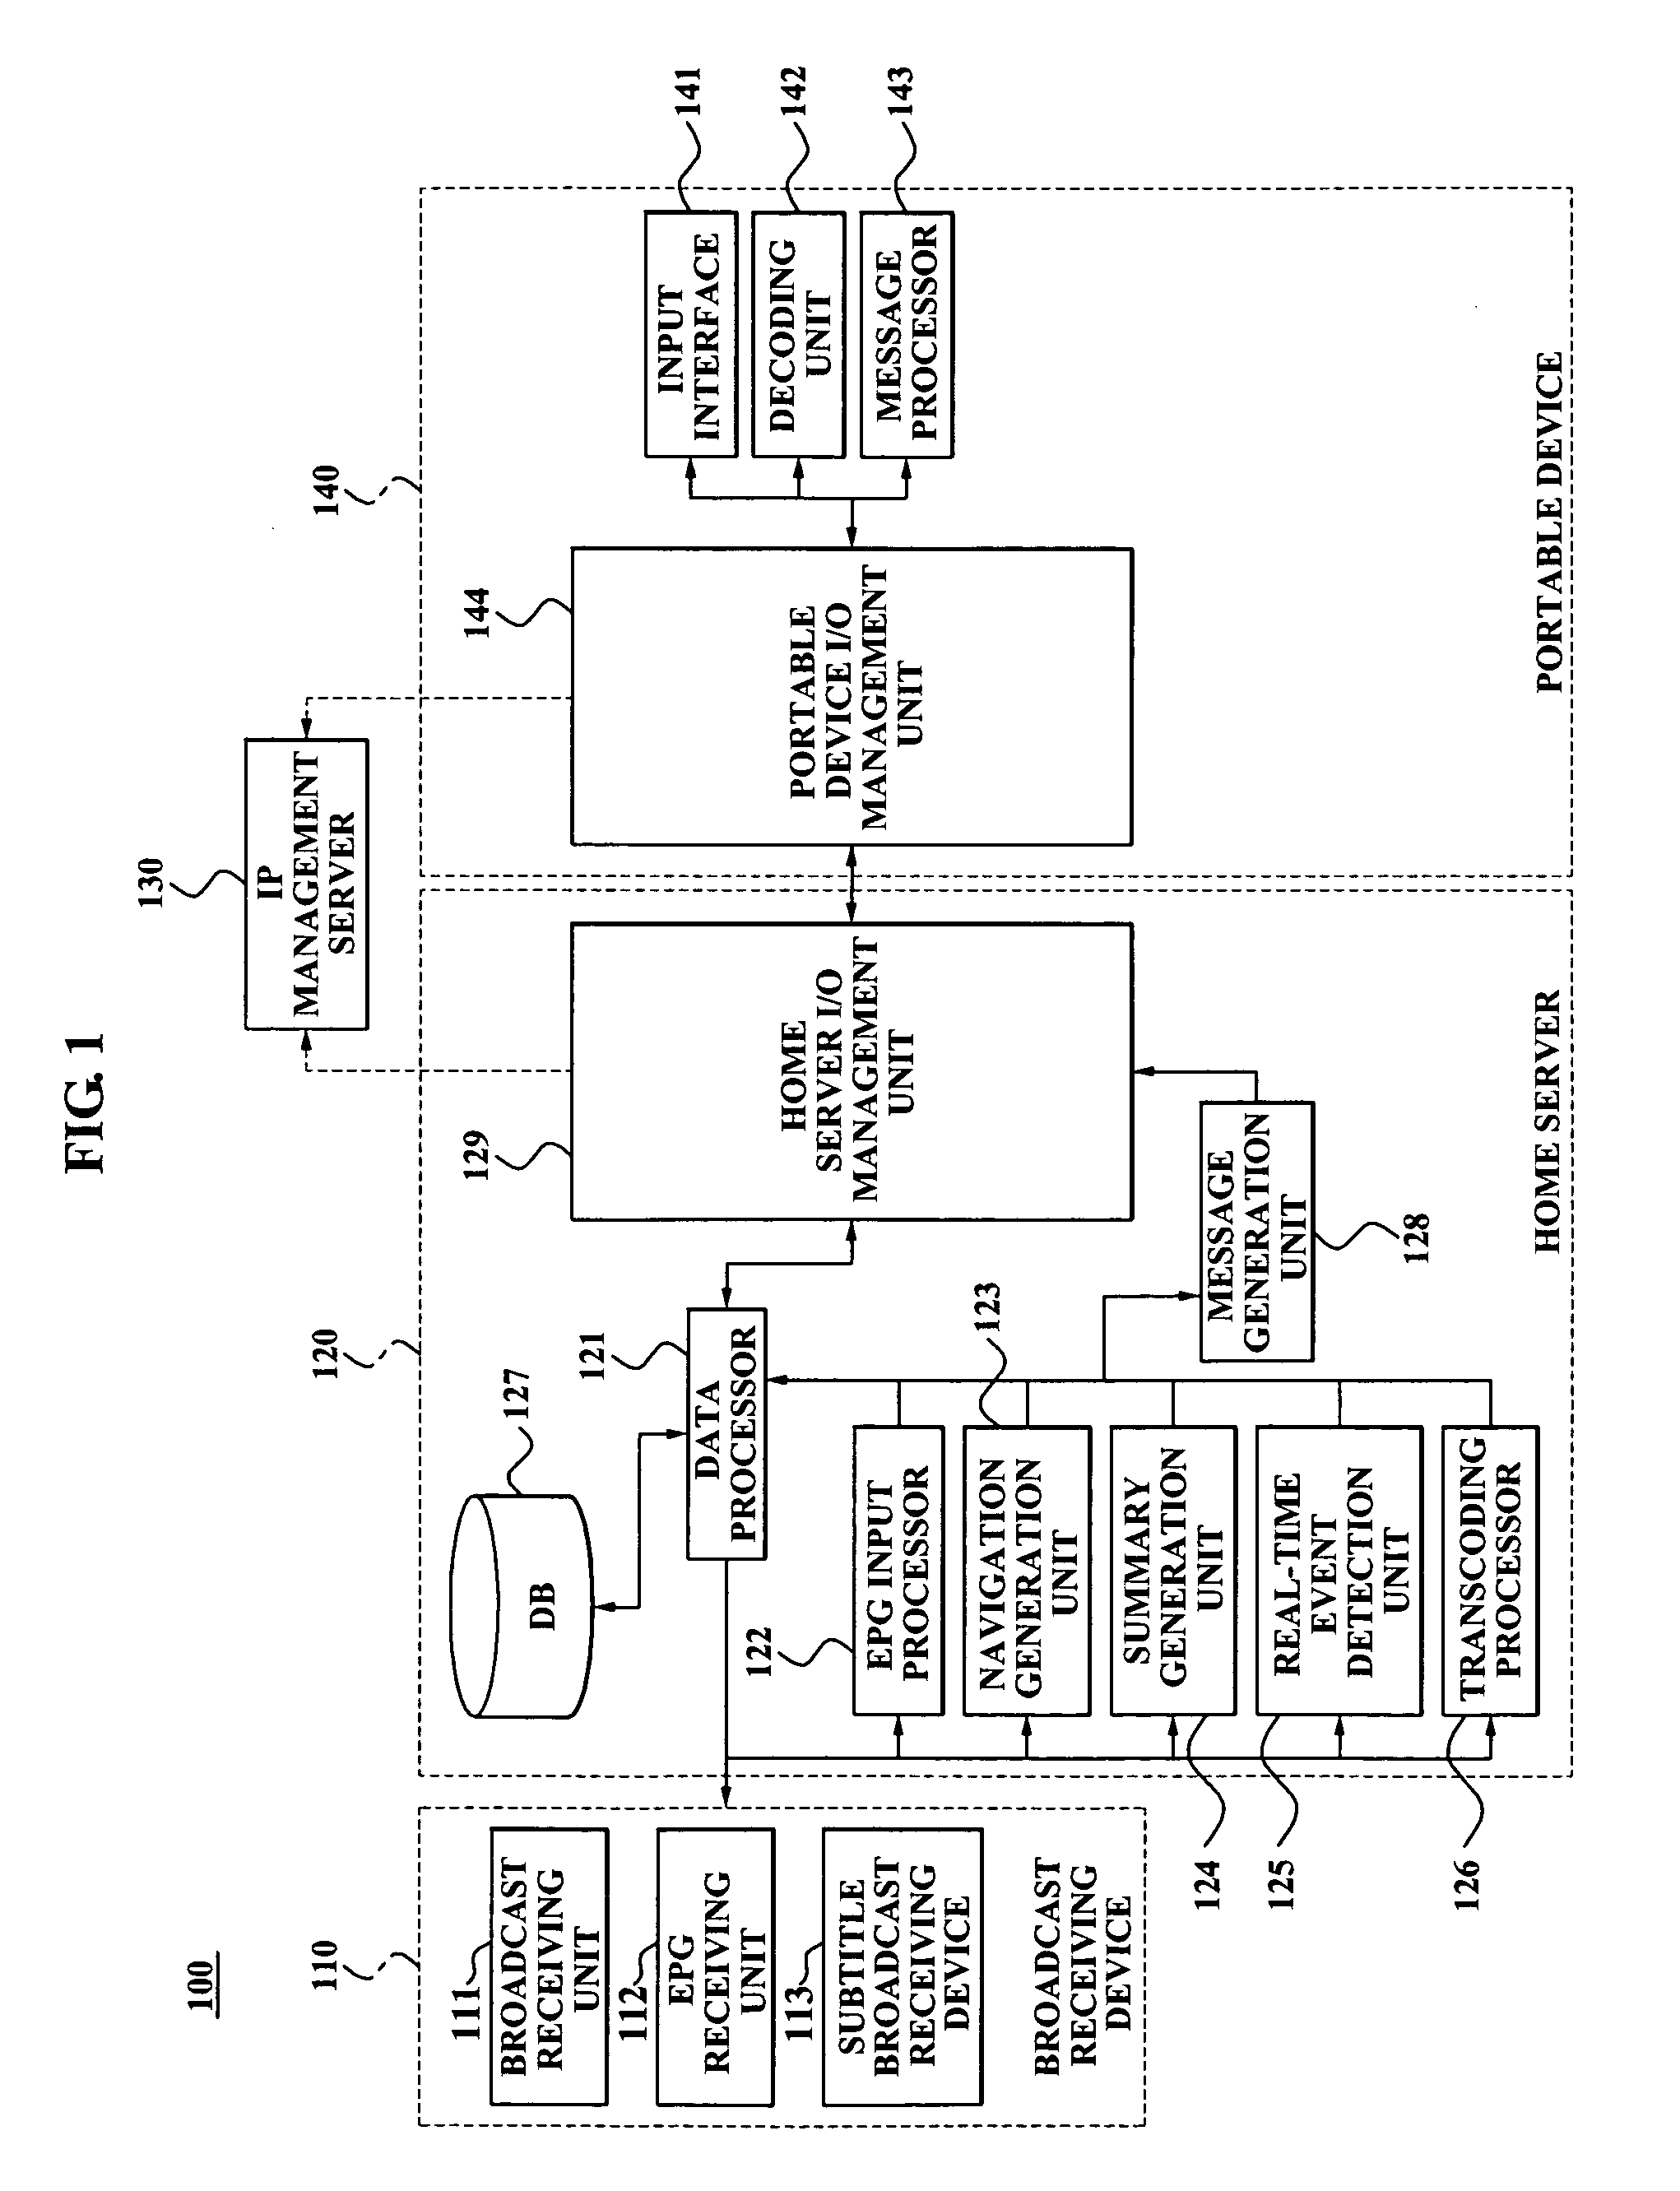 Method, system, and medium for providing broadcasting service using home server and mobile phone